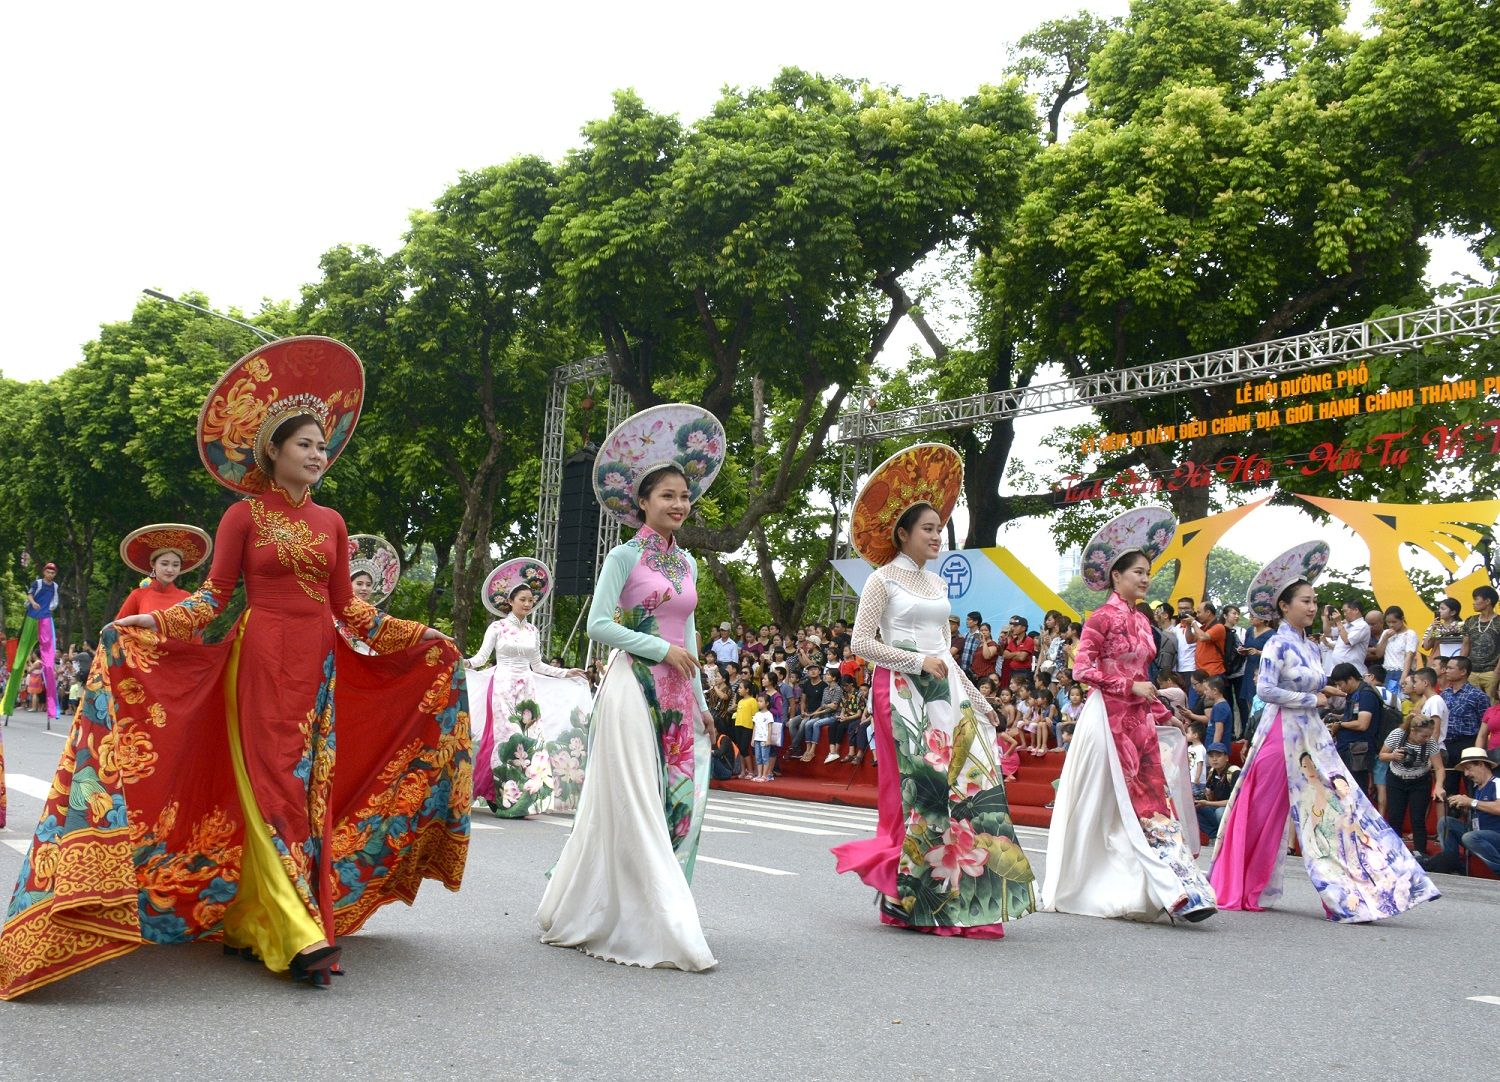 Performance of Ao dai at pedestrian streets nearby Hoan Kiem lake (Source: quocphongthudo.vn)